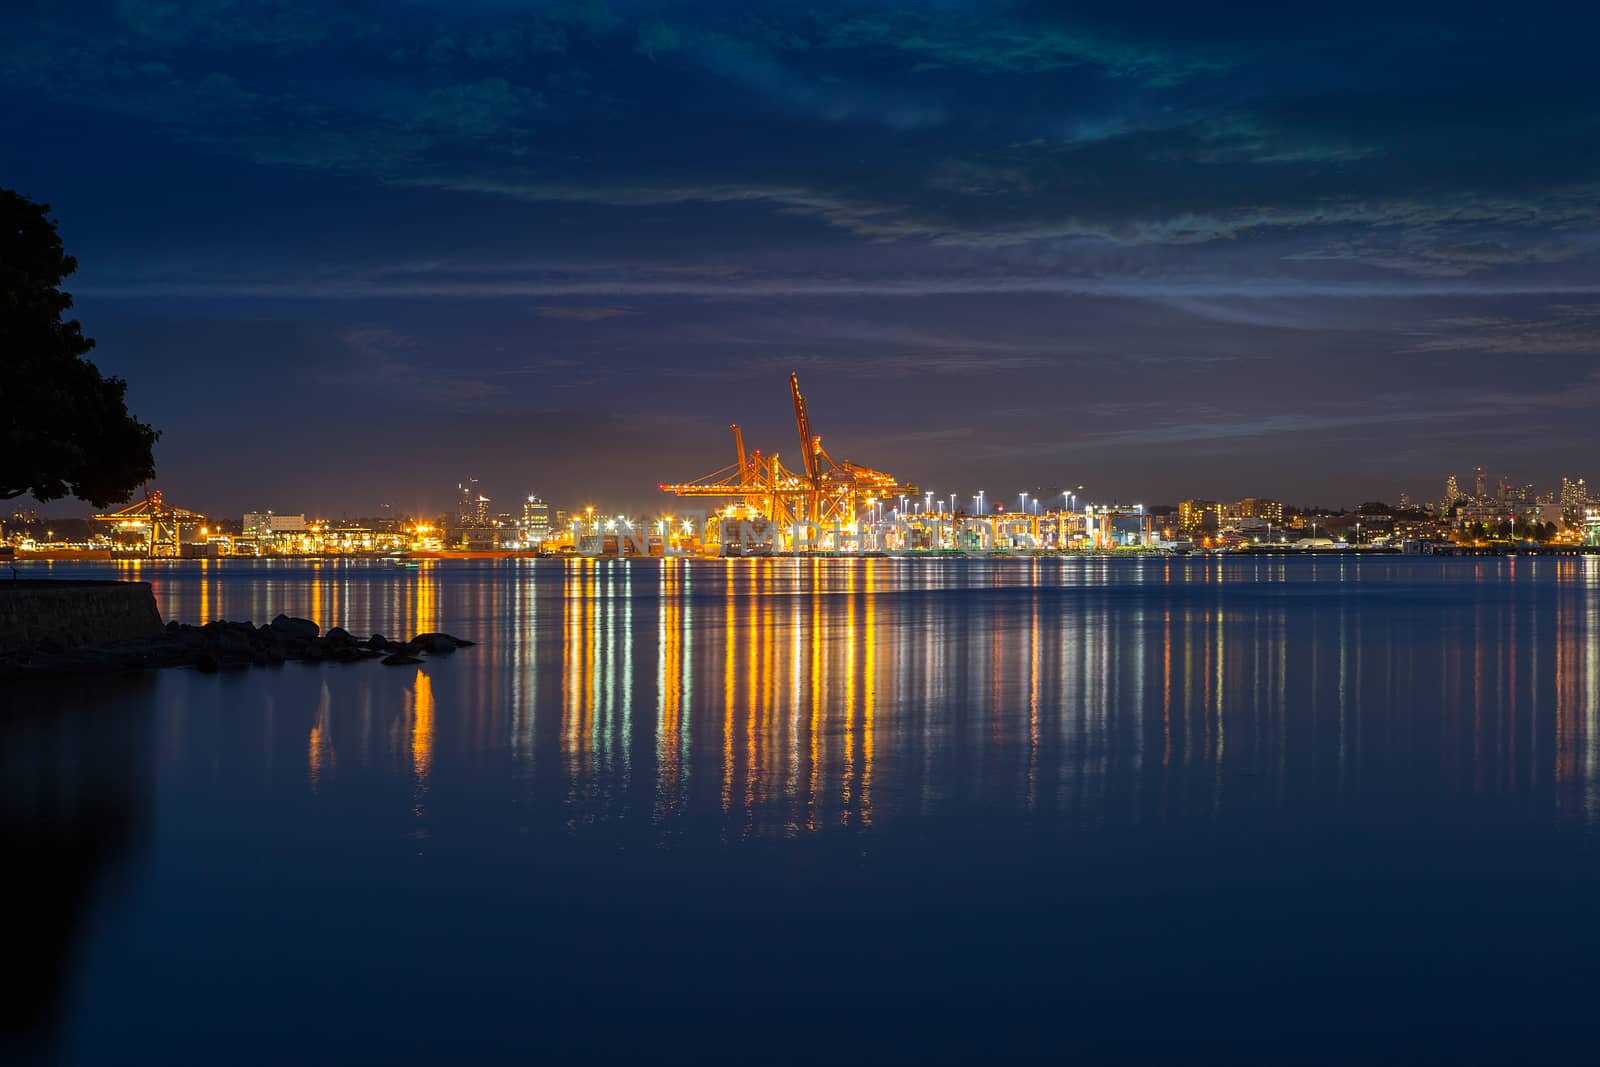 Port of Vancouver BC in the Evening by jpldesigns